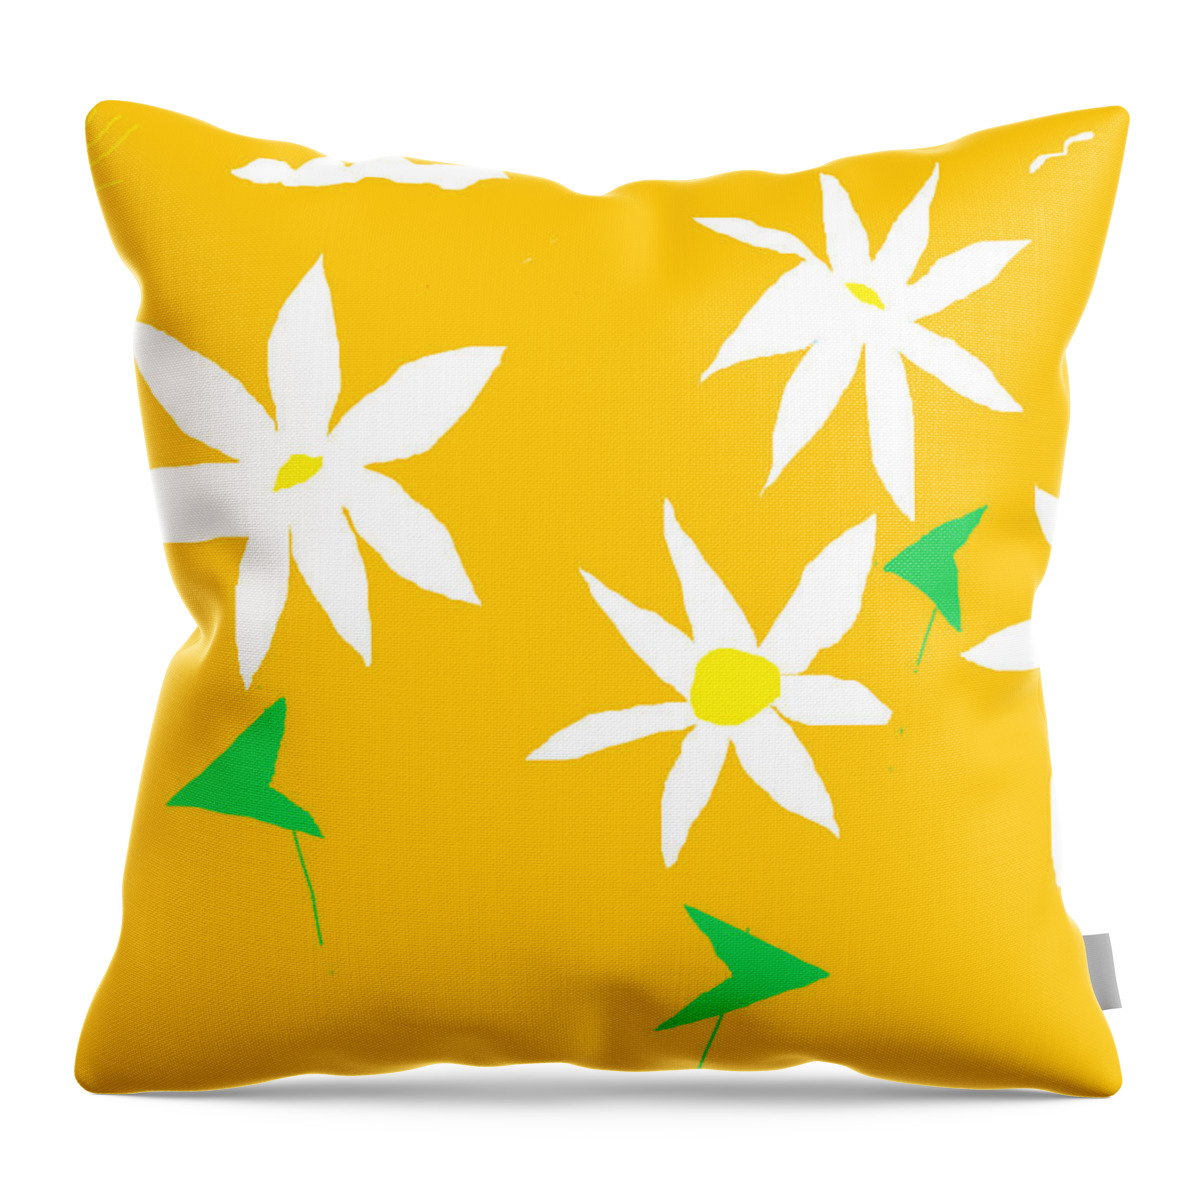 Daisy Throw Pillow featuring the painting Fine Day Yellow by Anita Dale Livaditis